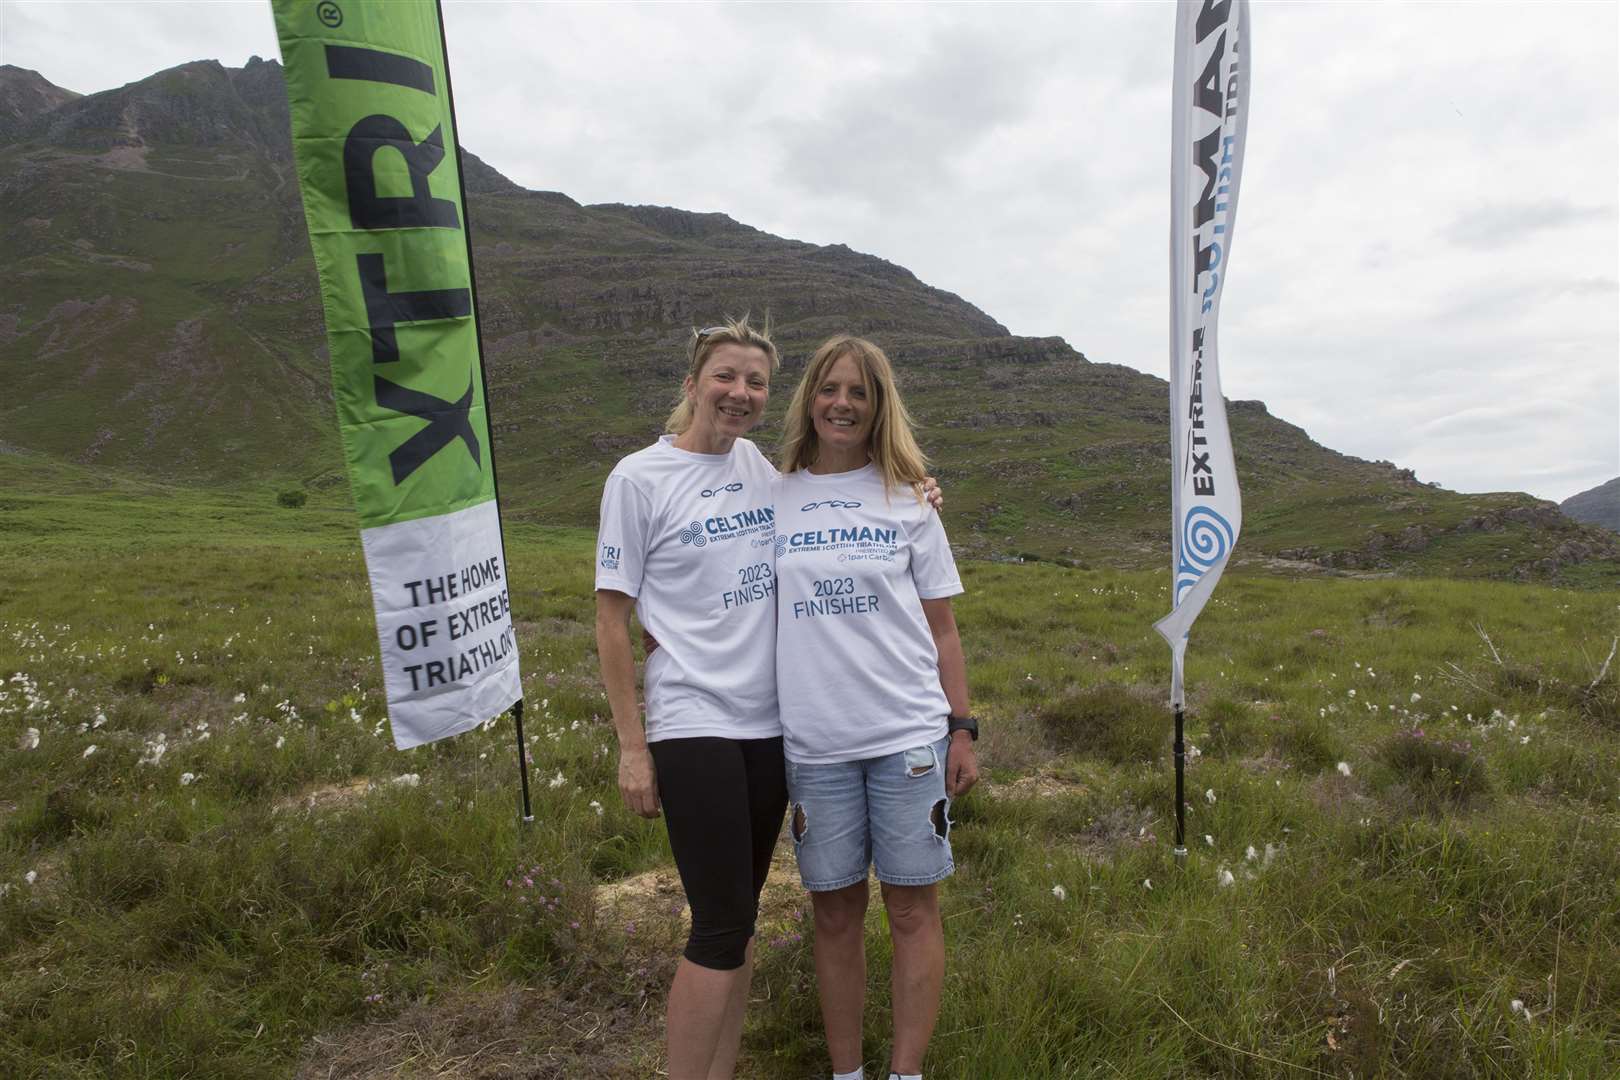 Two Thurso women, Debbie Larnach, (left), and Lorna Stanger have completed the Celtman Extreme Scottish Triathlon held in Wester Ross. For Lorna it was the sixth time she has successfully completed the event, while Debbie was taking part for the first time. Held last Saturday, competitors in the extreme triathlon have to complete a 3.4 kilometer swim in Loch Shieldaig, then take to their bikes for a 200 kilometer ride from Shieldaig on a circular route thats take them through, Kinlochewe, Gairloch, Dundonnell, Garve, Achnasheen and back to Kinlochewe, where they set of on the 42 kilometer run section which is mainly off road on rough ground and tracks around Beinn Eighe and Glen Torridon, finishing at Torridon village hall. There are usually two routes, runners arriving before a certain cut off time at transition point T2a would usually be sent on the higher track while later runners would take a lower route. However this year, unlike the past two years, the weather was hot and calm, but thunder and lighting meant only a handful of the competitors made it to the higher route, before it had to close due to safety concerns. For Debbie, a relief pupil support assistant at Thurso High School, this was her first Celtman and also her first full lenght extreme triathlon. She finished in a time of 14 hours, 58 minutes and 22 seconds. Lorna came home in a time of 16:42:51. Last year she qualified for a red teeshirt marking the fact she had completed the event five times, making her only the second woman to have received the award. For the second successive year Ross Creber, from Scotland was the overall winner in 11.29.38. Twenty-two entrant had to retire from the race, which had a draft entry of 259 competitiors from around the world. Photo: Robert MacDonald/Northern Studios